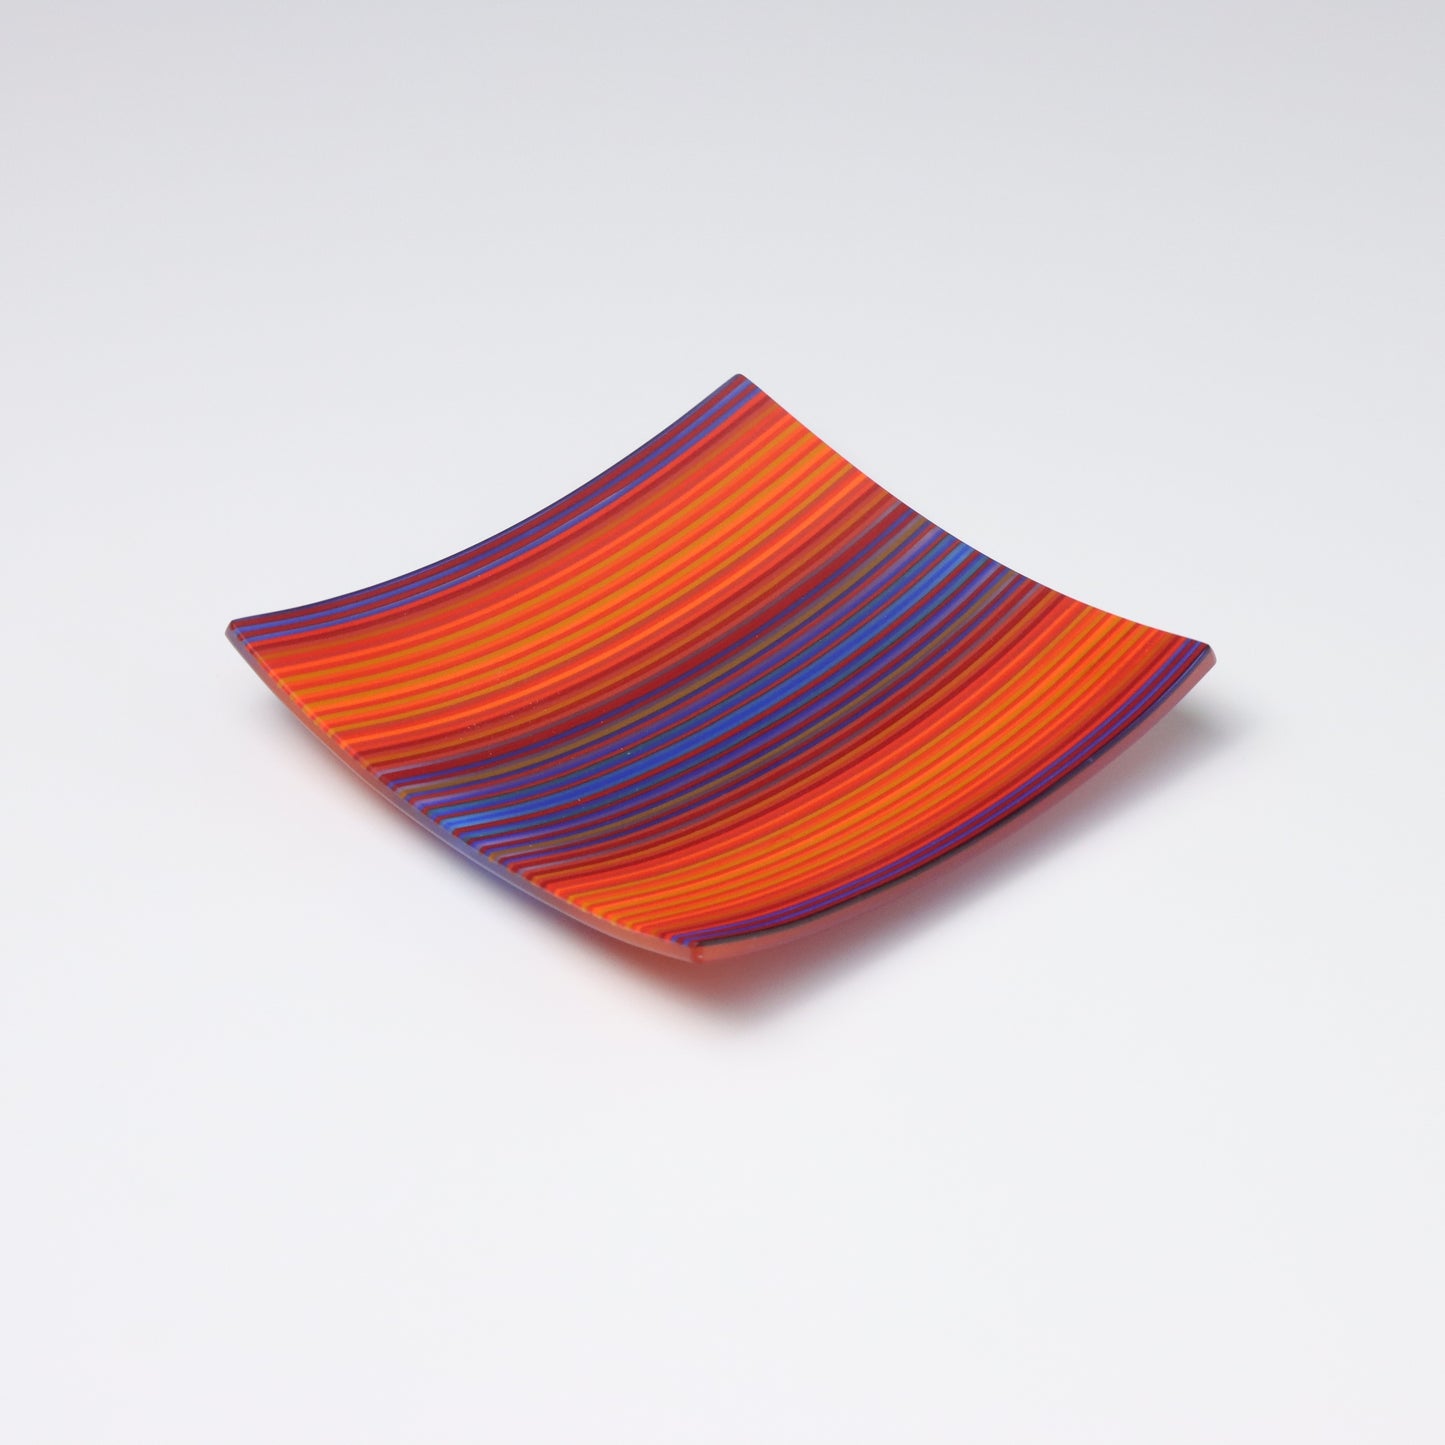 A colourful decorative fused glass small square shaped plate that curves up at the corners. With a ColourWave design the transitions from purples at the edges and center. With a warm glowing orange between.